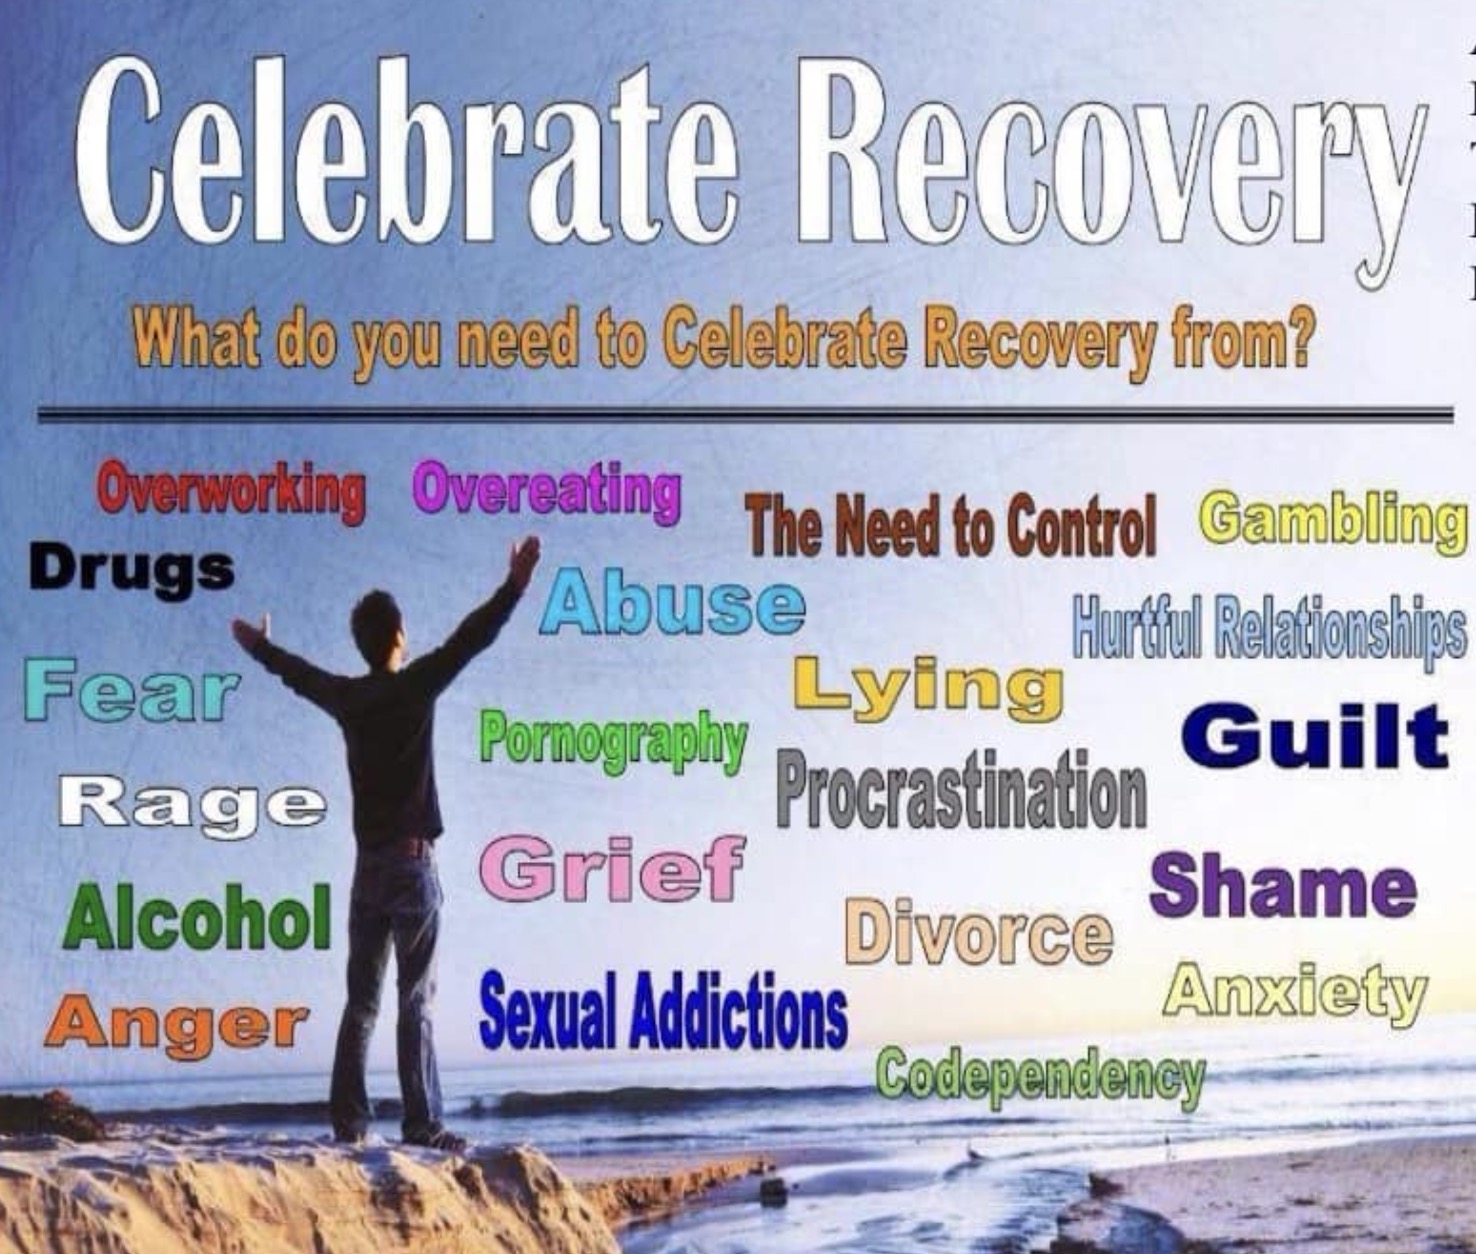 Celebrate_Recovery_meeting